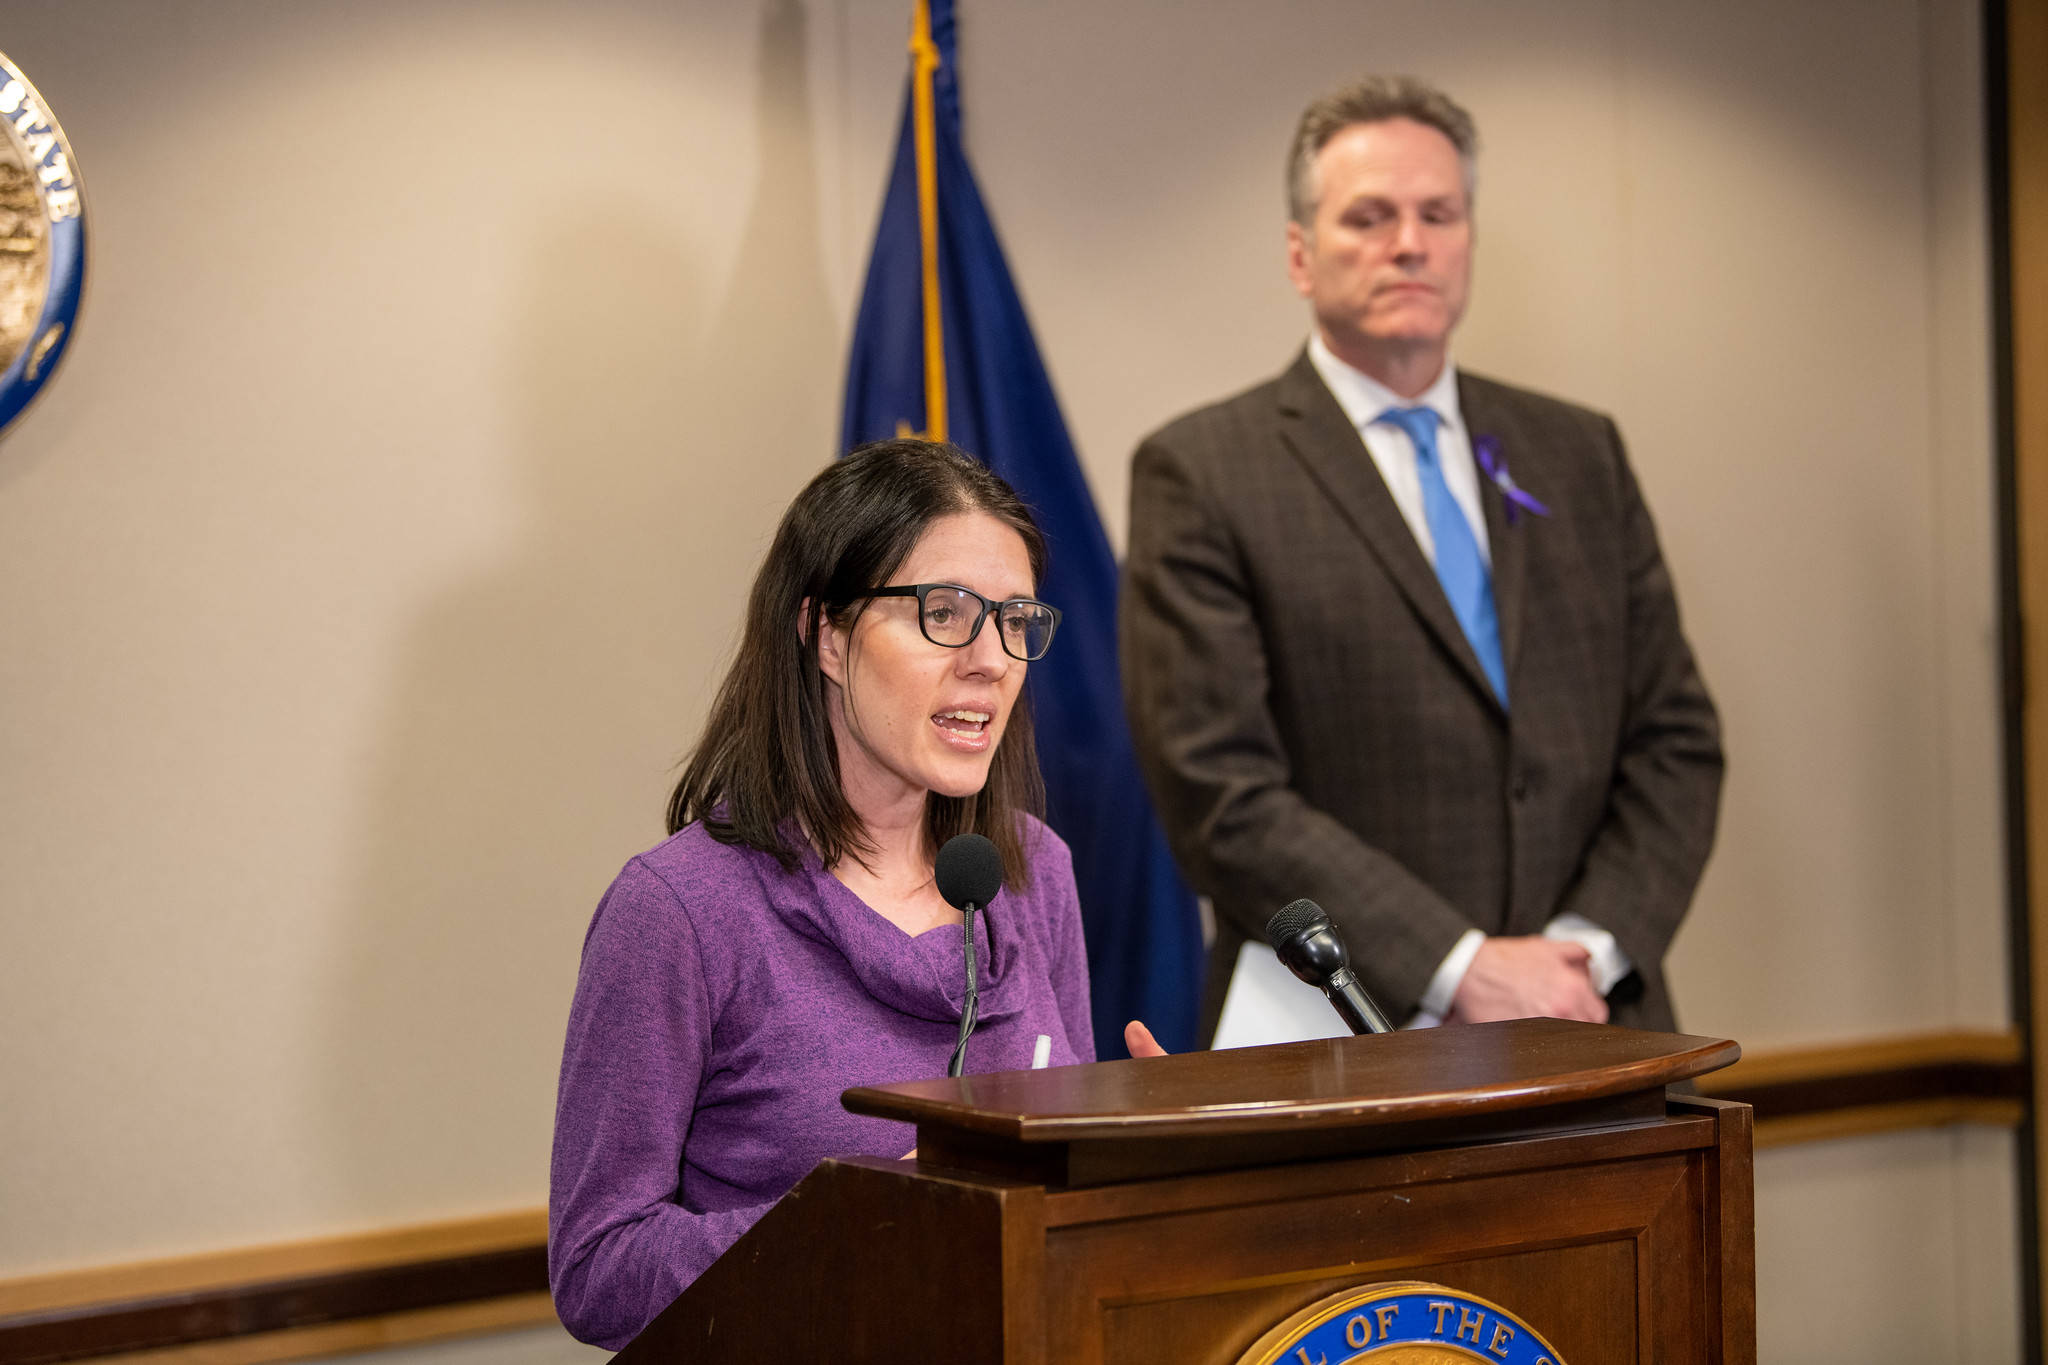 Dr. Anne Zink, chief medical officer for the State of Alaska, front, and Gov. Mike Dunleavy at a press conference in Anchorage on Thursday, March 19, 2020. (Courtesy photo | Office of Gov. Mike Dunleavy)